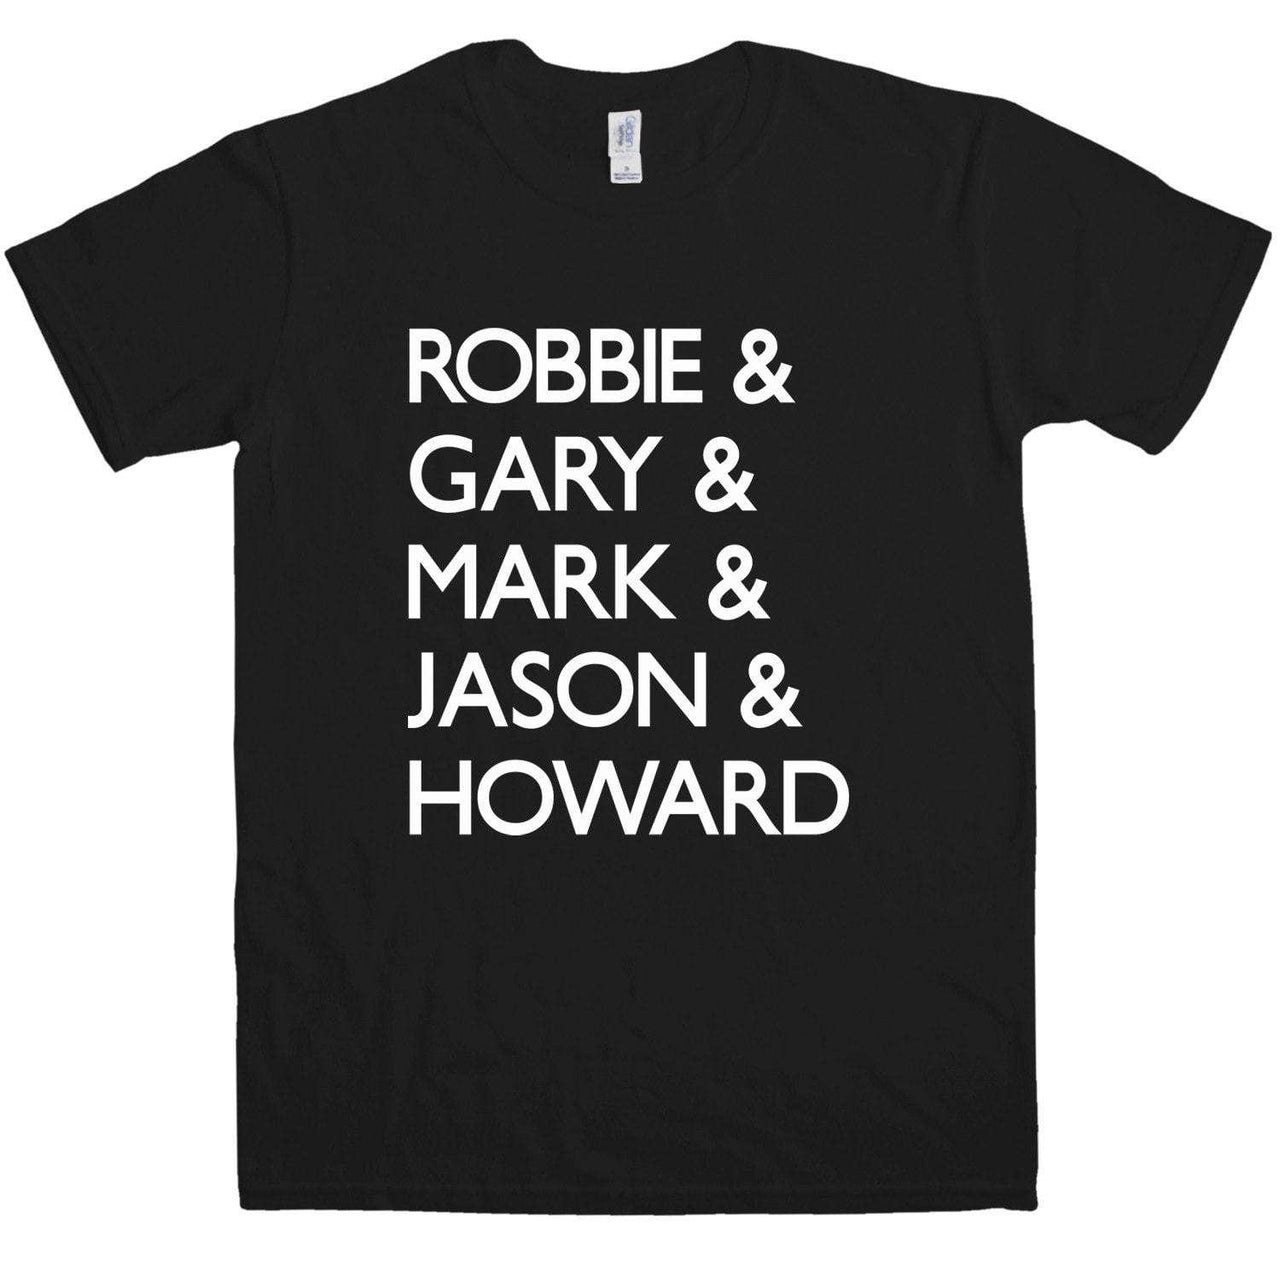 5 Names Unisex T-Shirt For Men And Women, Inspired By Take That 8Ball